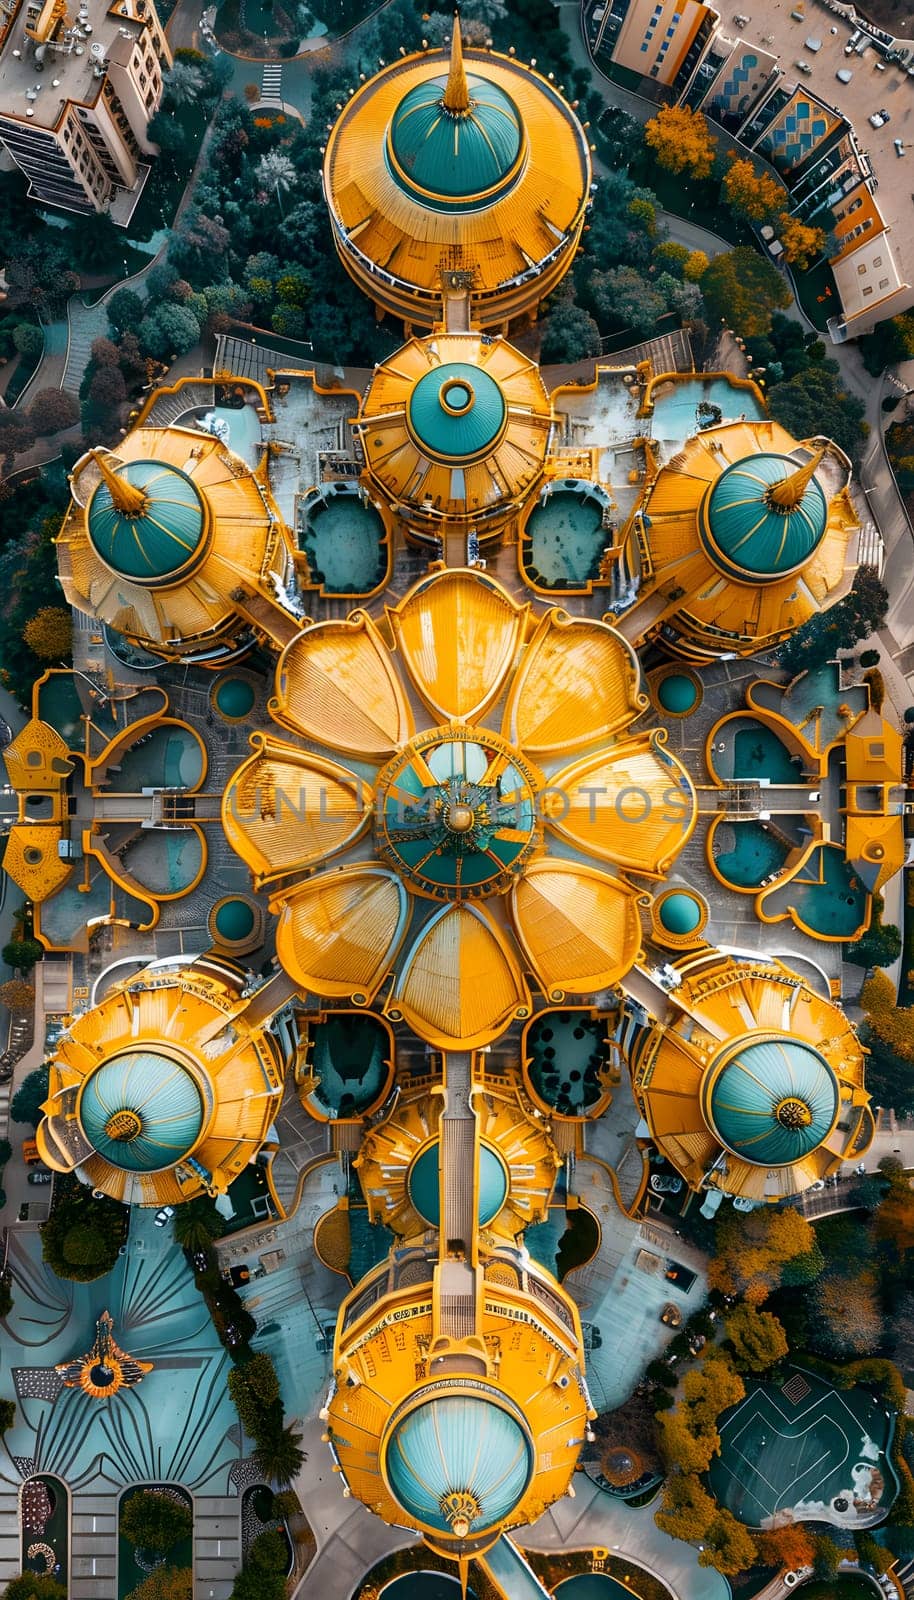 An artistic display of yellow and electric blue domes resembling terrestrial plants creates a symmetrical pattern on the glass ceiling of a large building, resembling a creative arts masterpiece